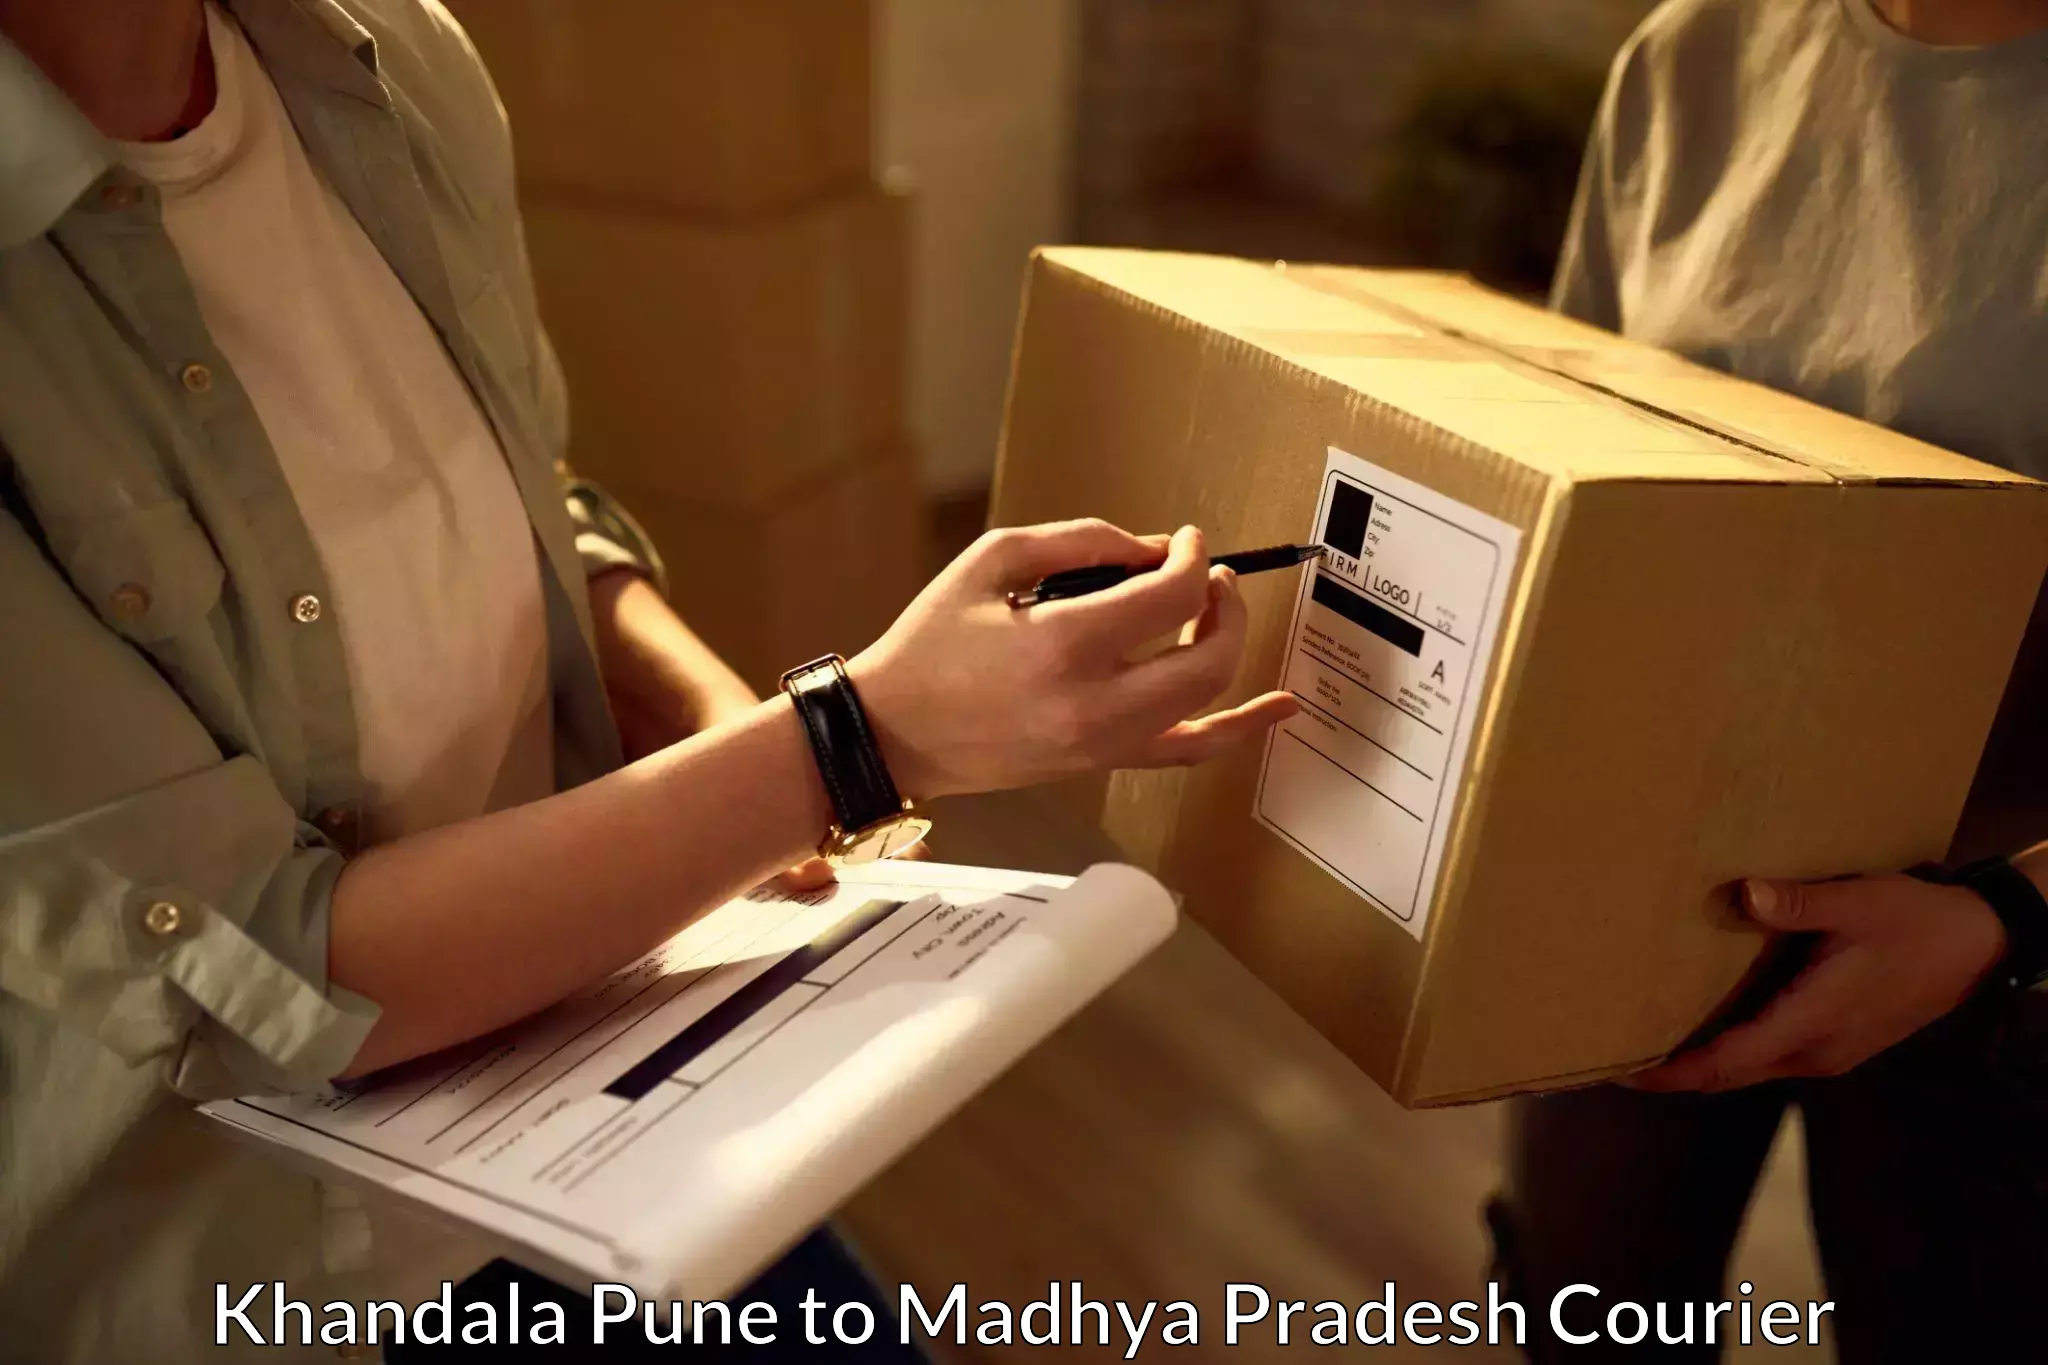 Nationwide parcel services Khandala Pune to Gwalior